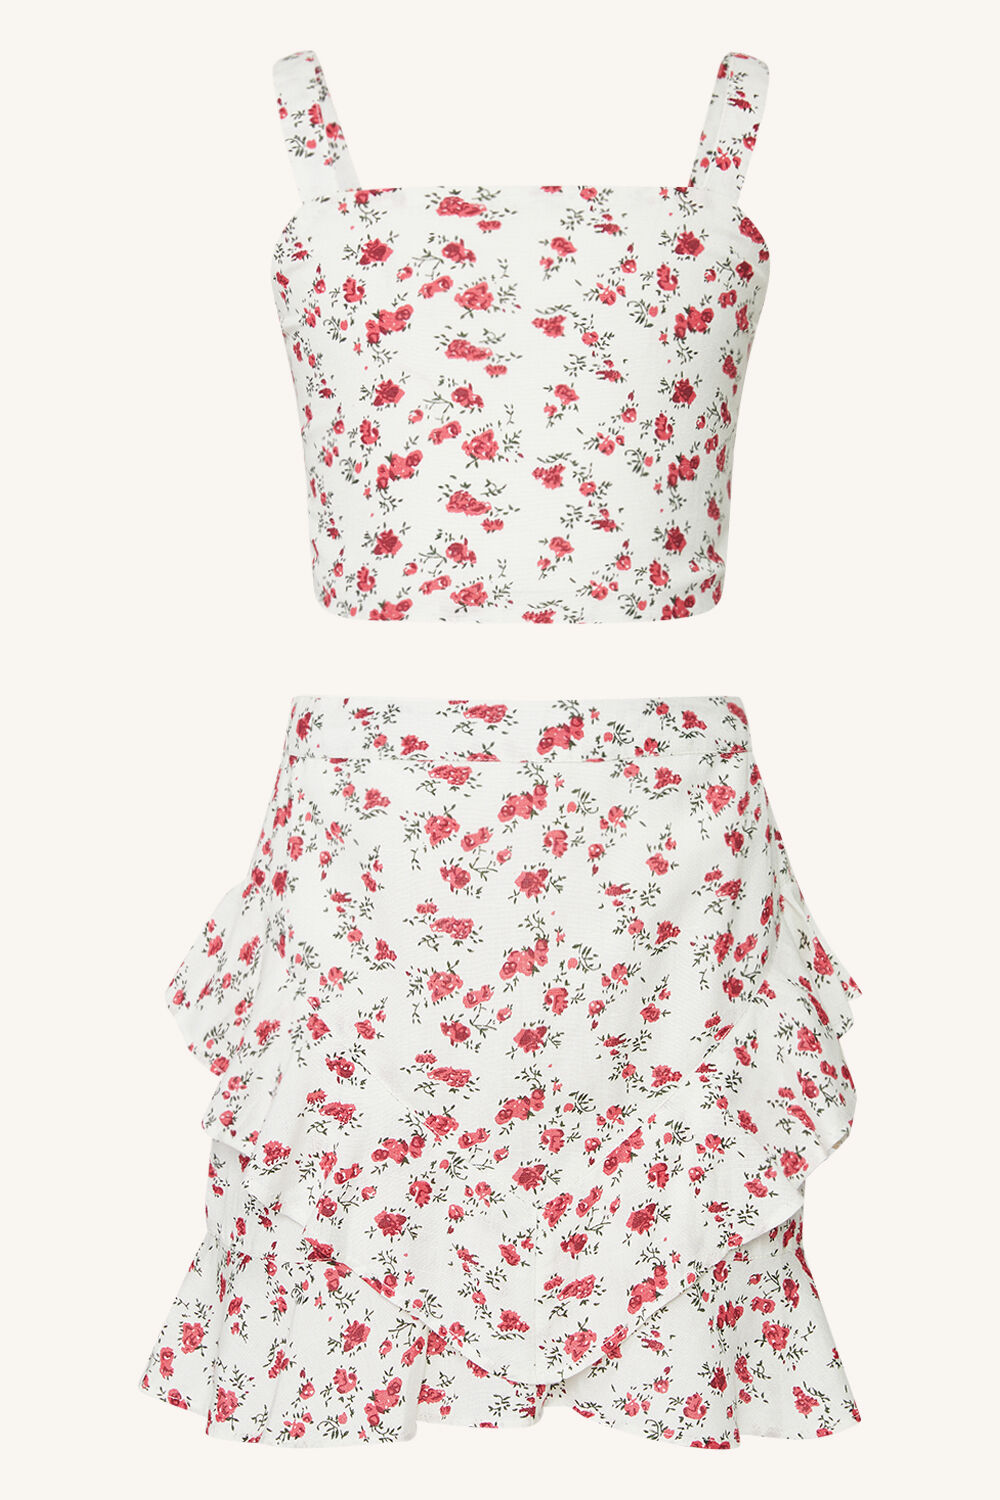 GIRLS SHANI FLORAL MINI SKIRT in colour SPICY ORANGE